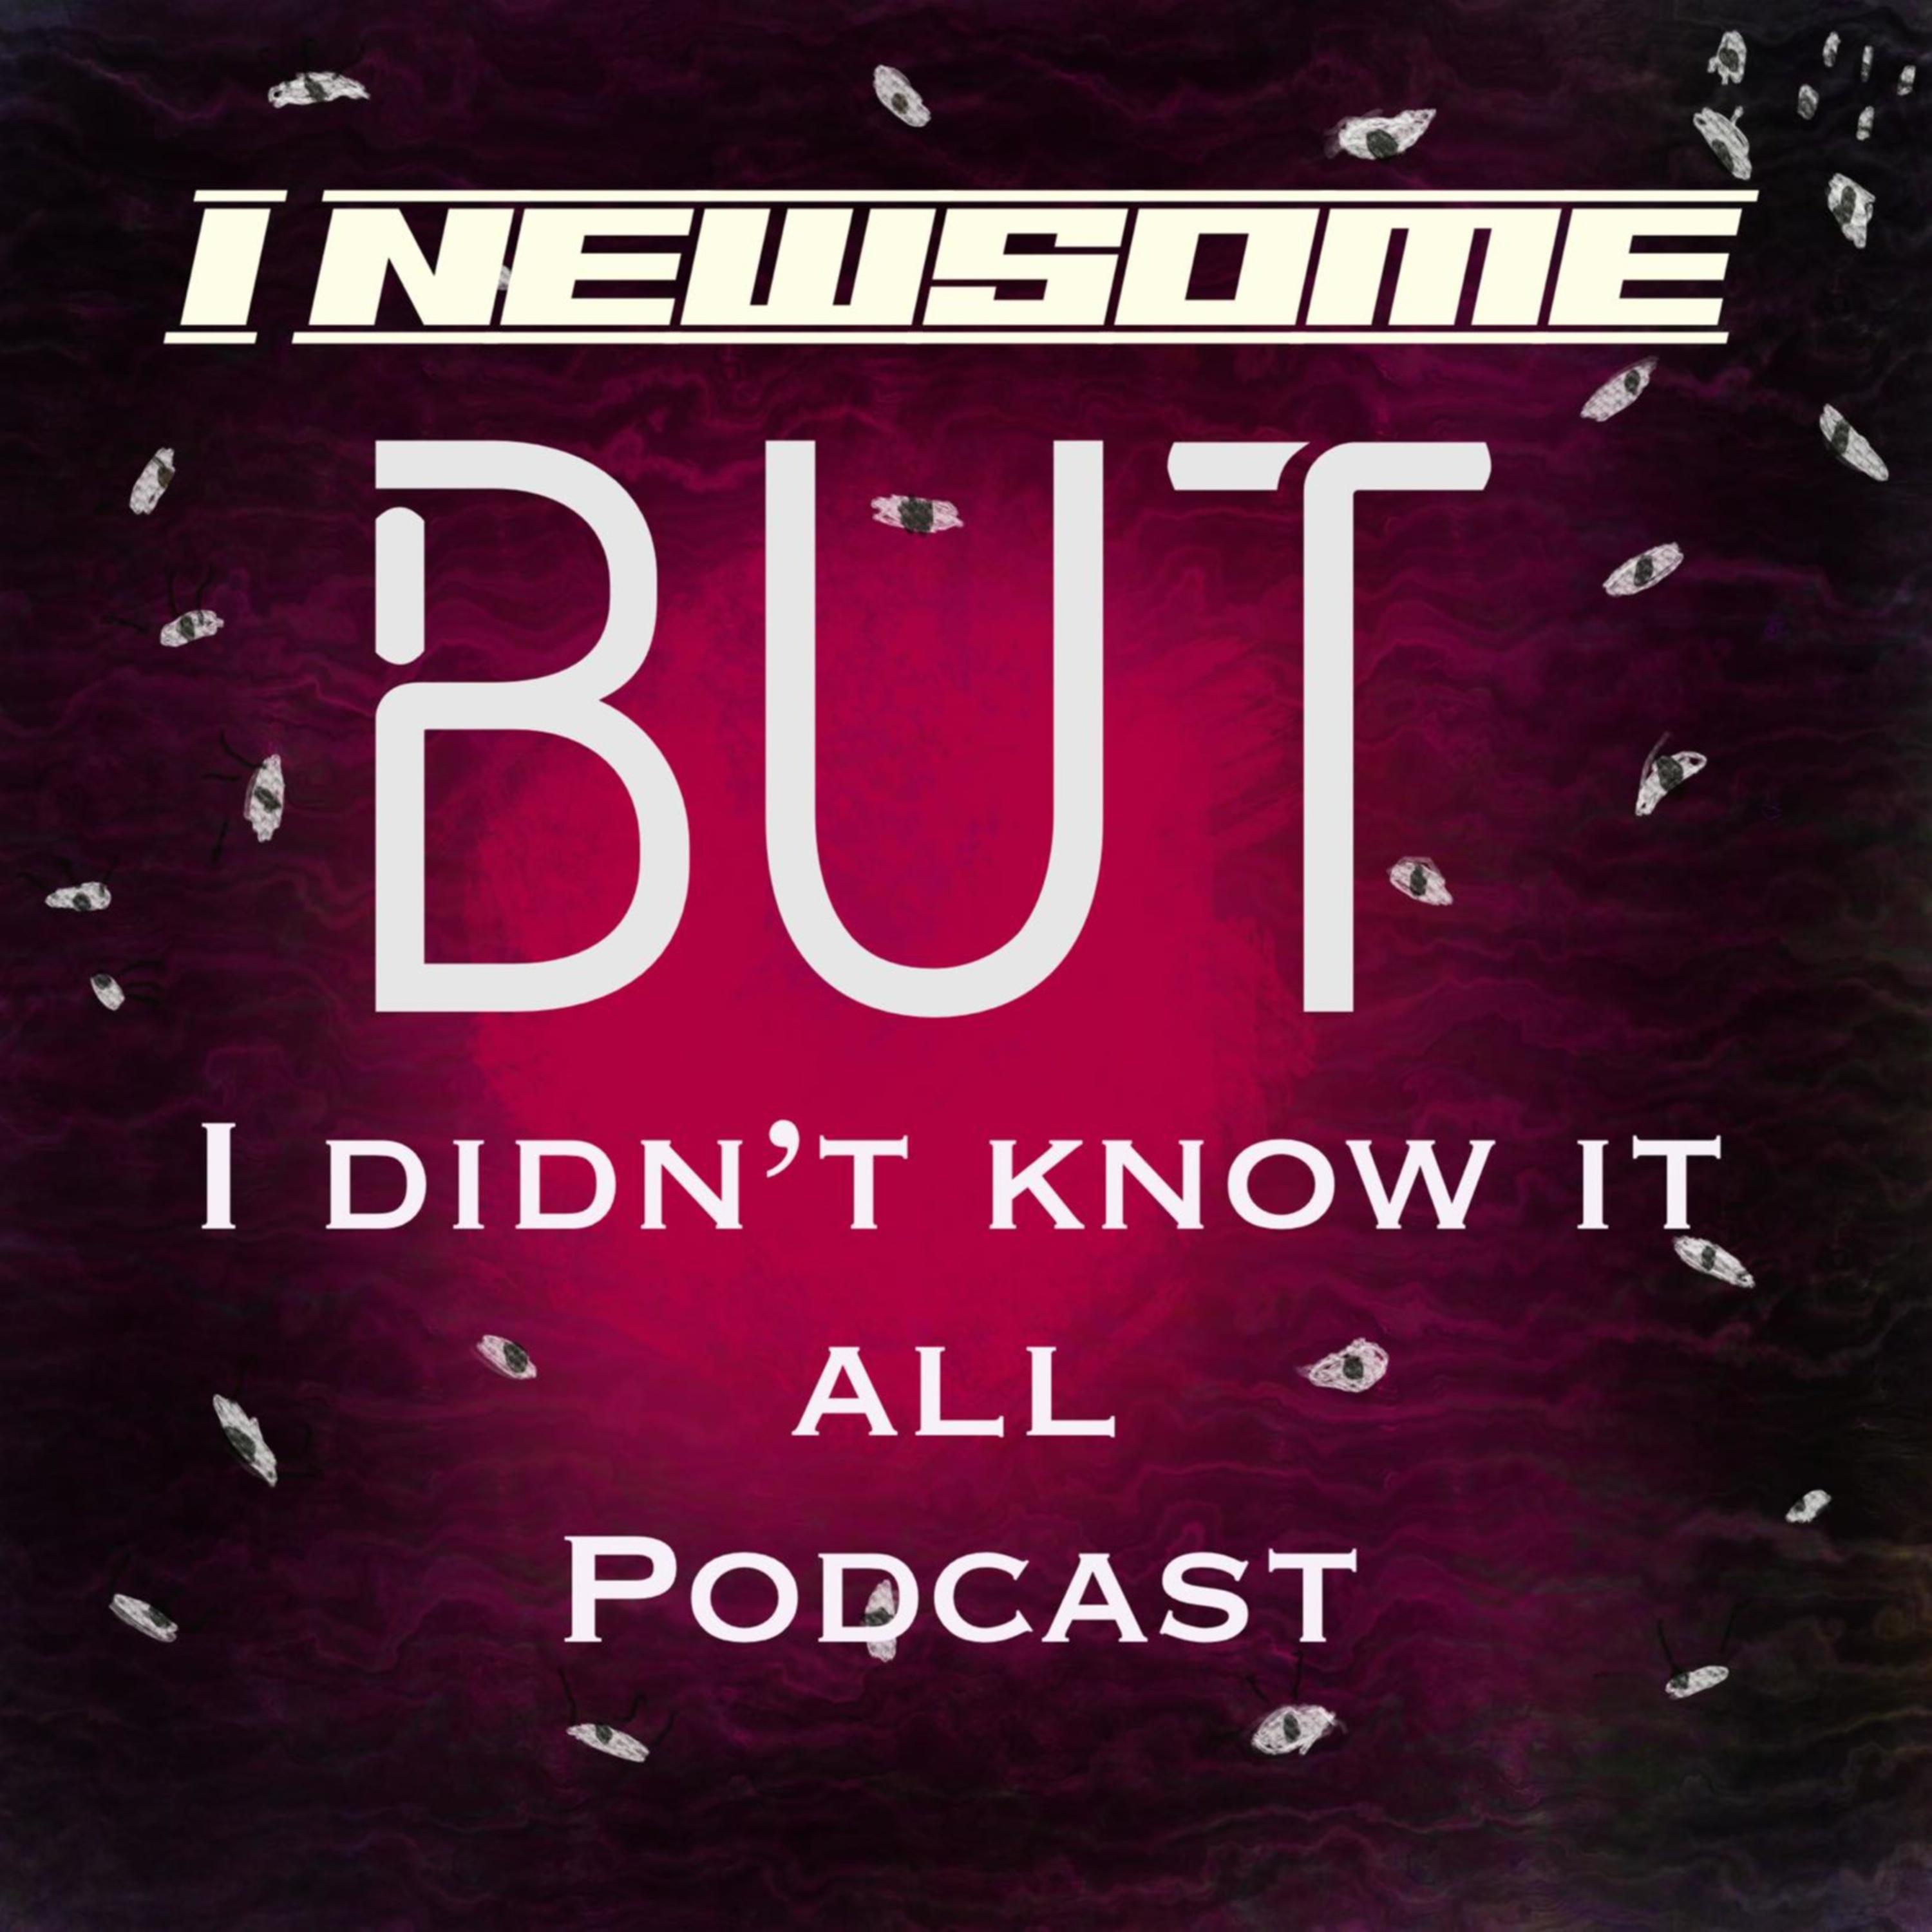 I Newsome But I Didn't Know It All Podcast